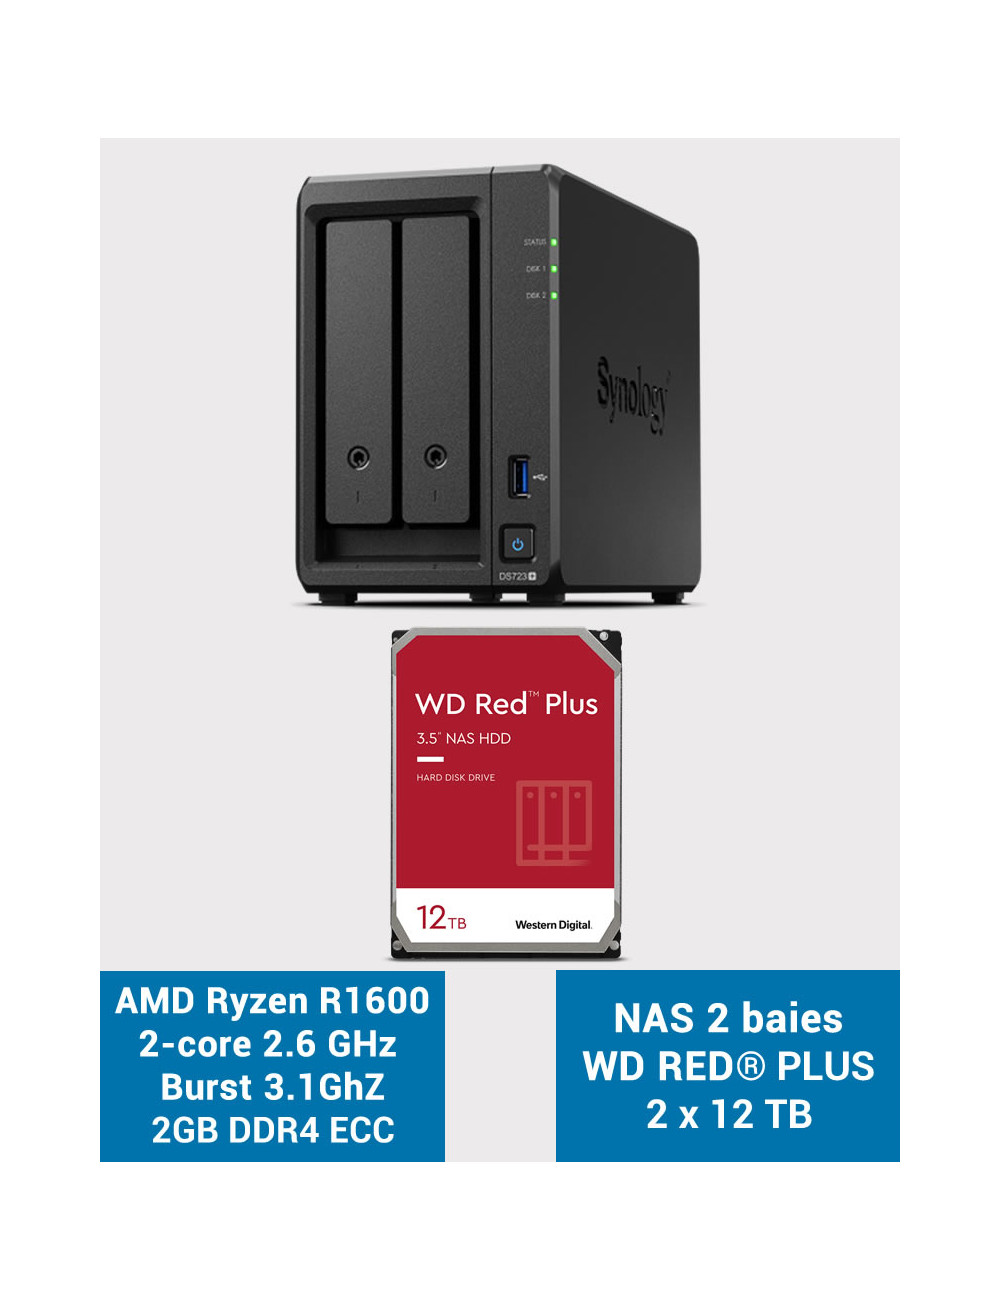 Synology DS723+ NAS Server WD RED PLUS 24TB (2x12TB)